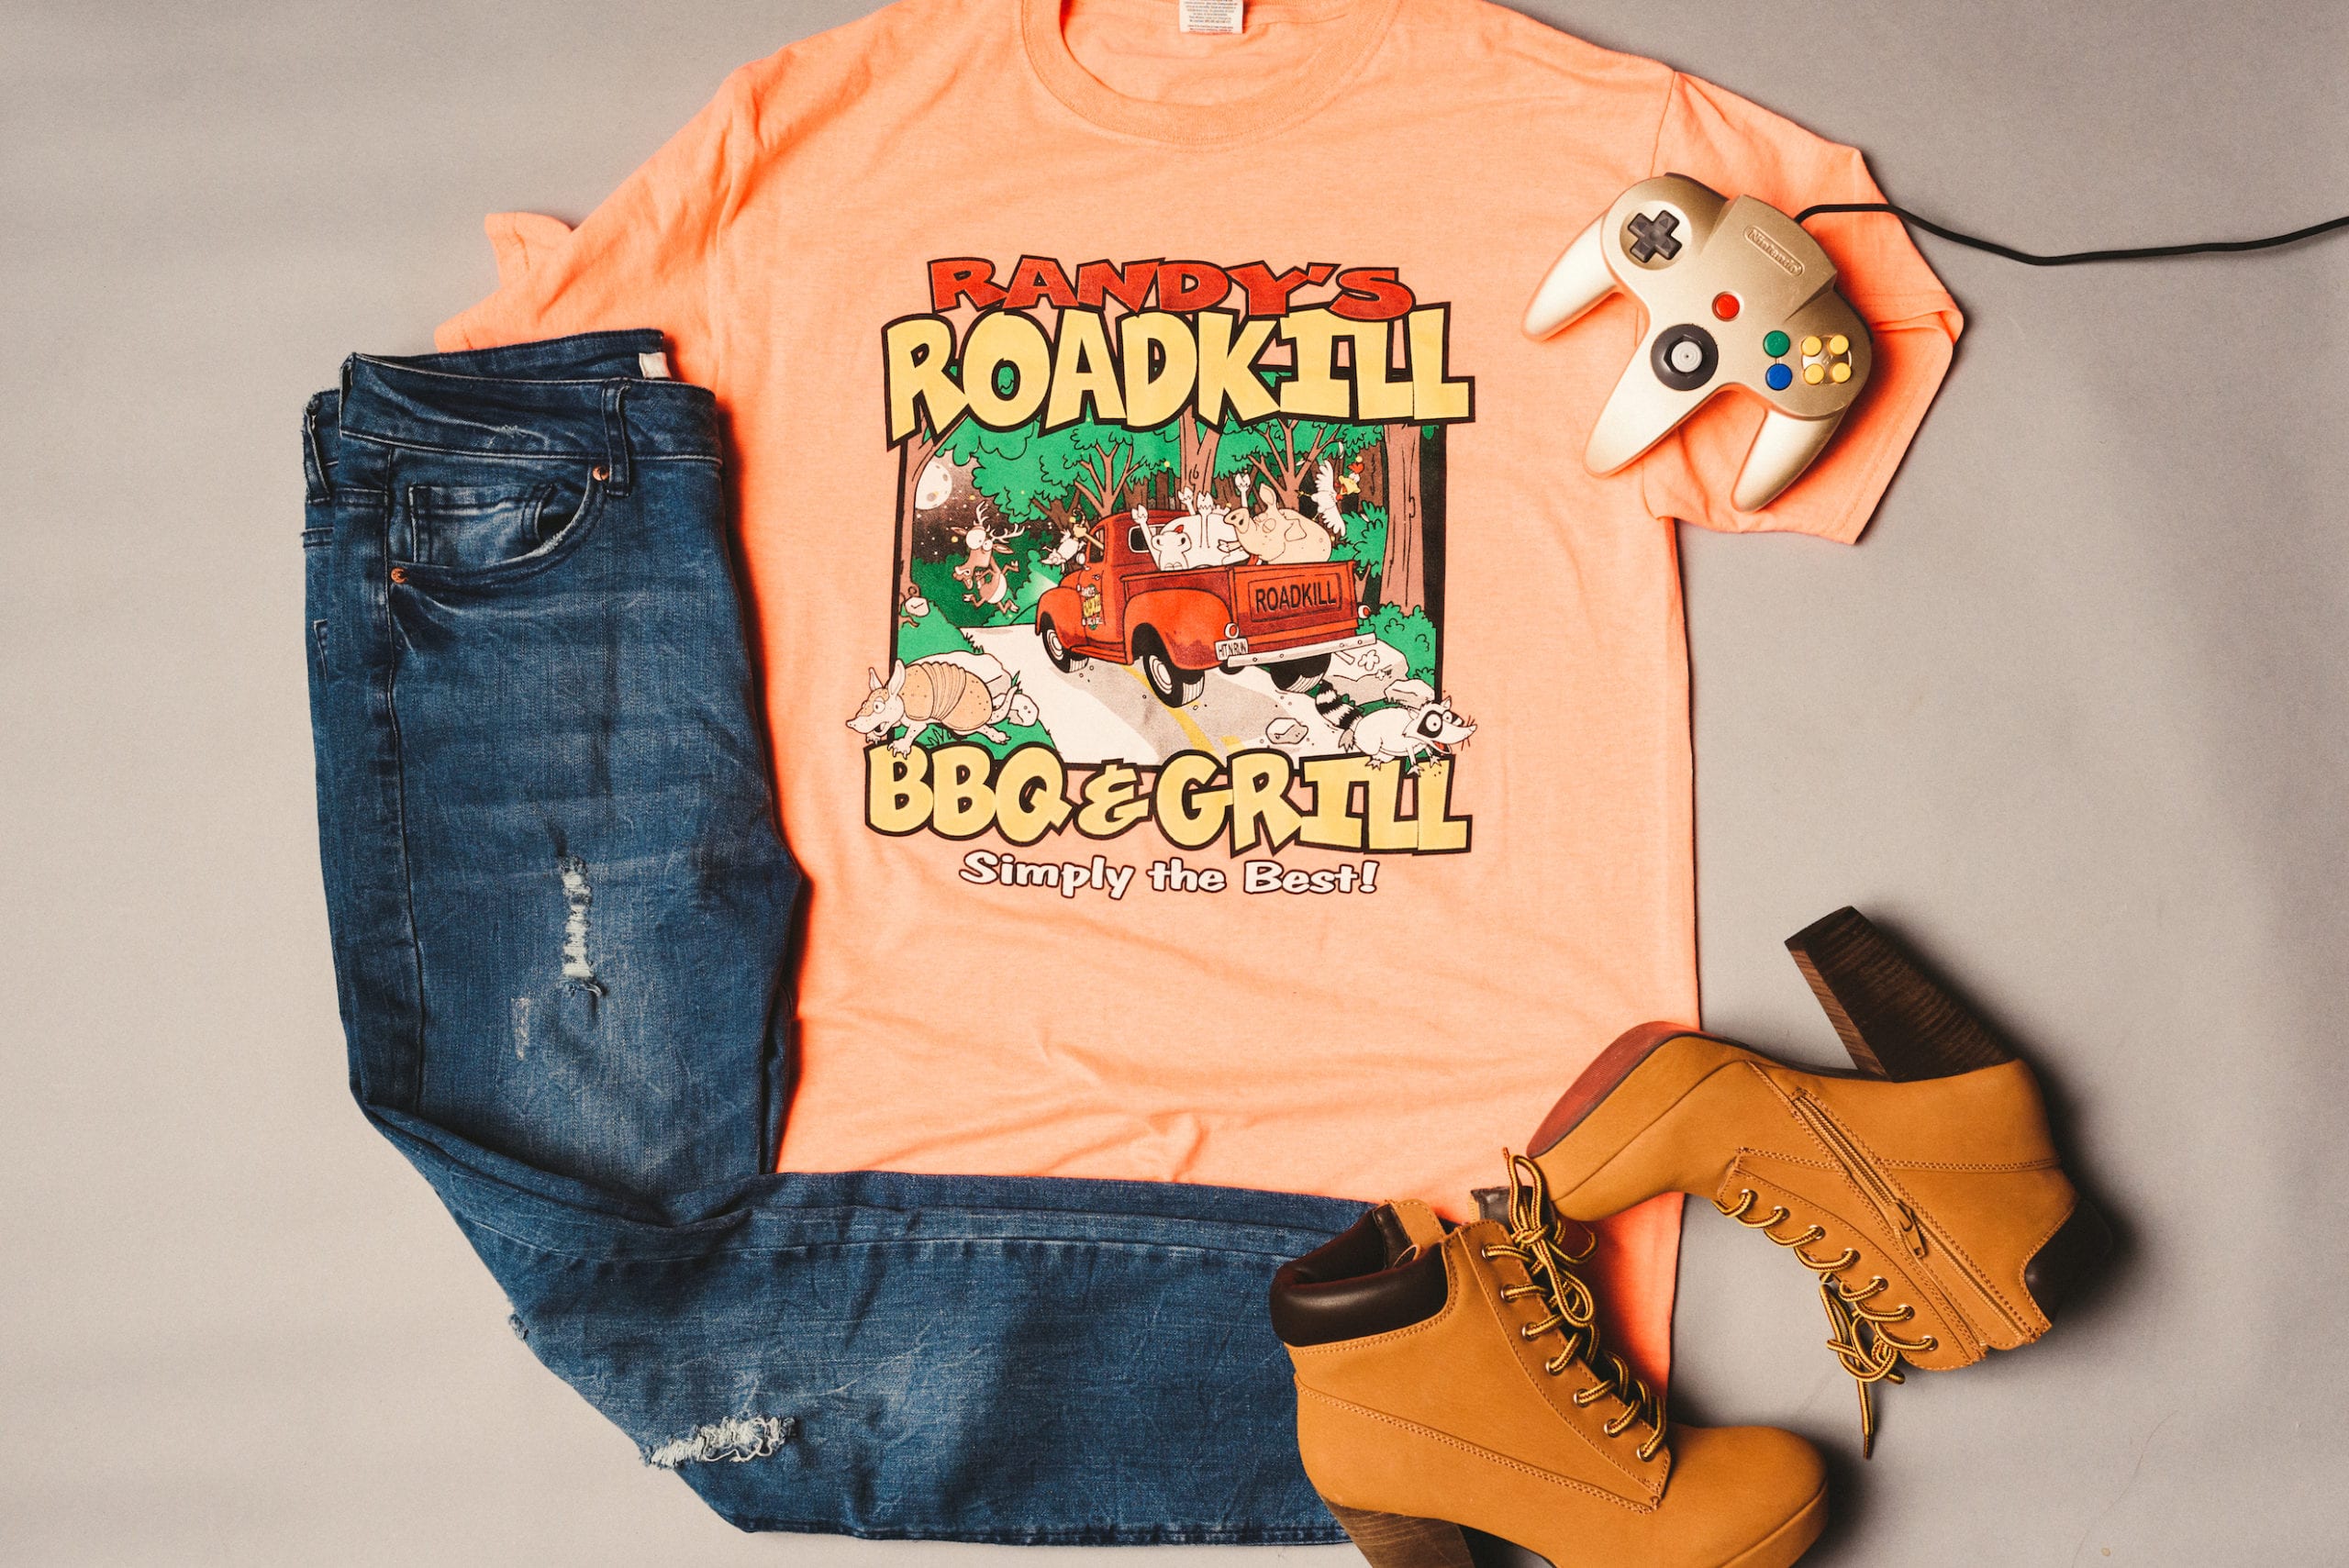 Heart Piece Media Day Orange Randy's Roadkill BBQ & Grill t shirt with jeans and leather high heel boots along with Nintendo controller on display